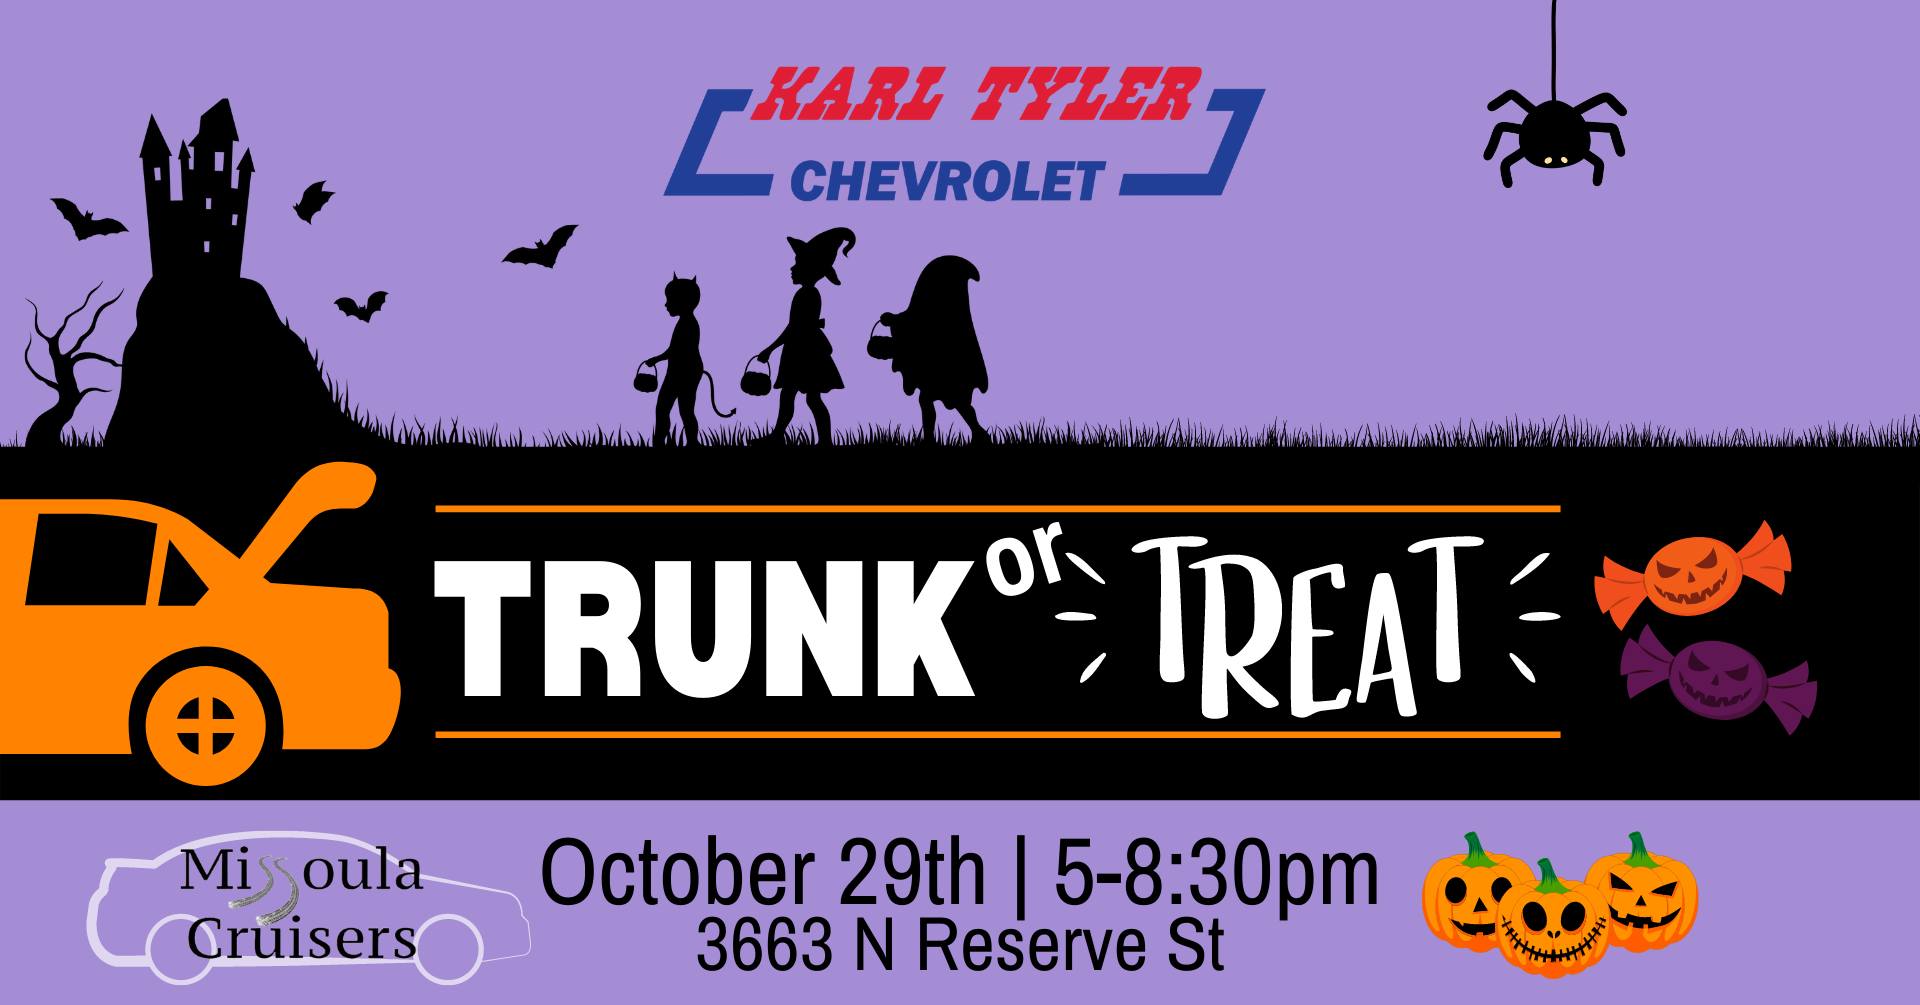 2nd Annual Karl Tyler Chevrolet Trunk or Treat with Missoula Cruisers and Nvicta Squad